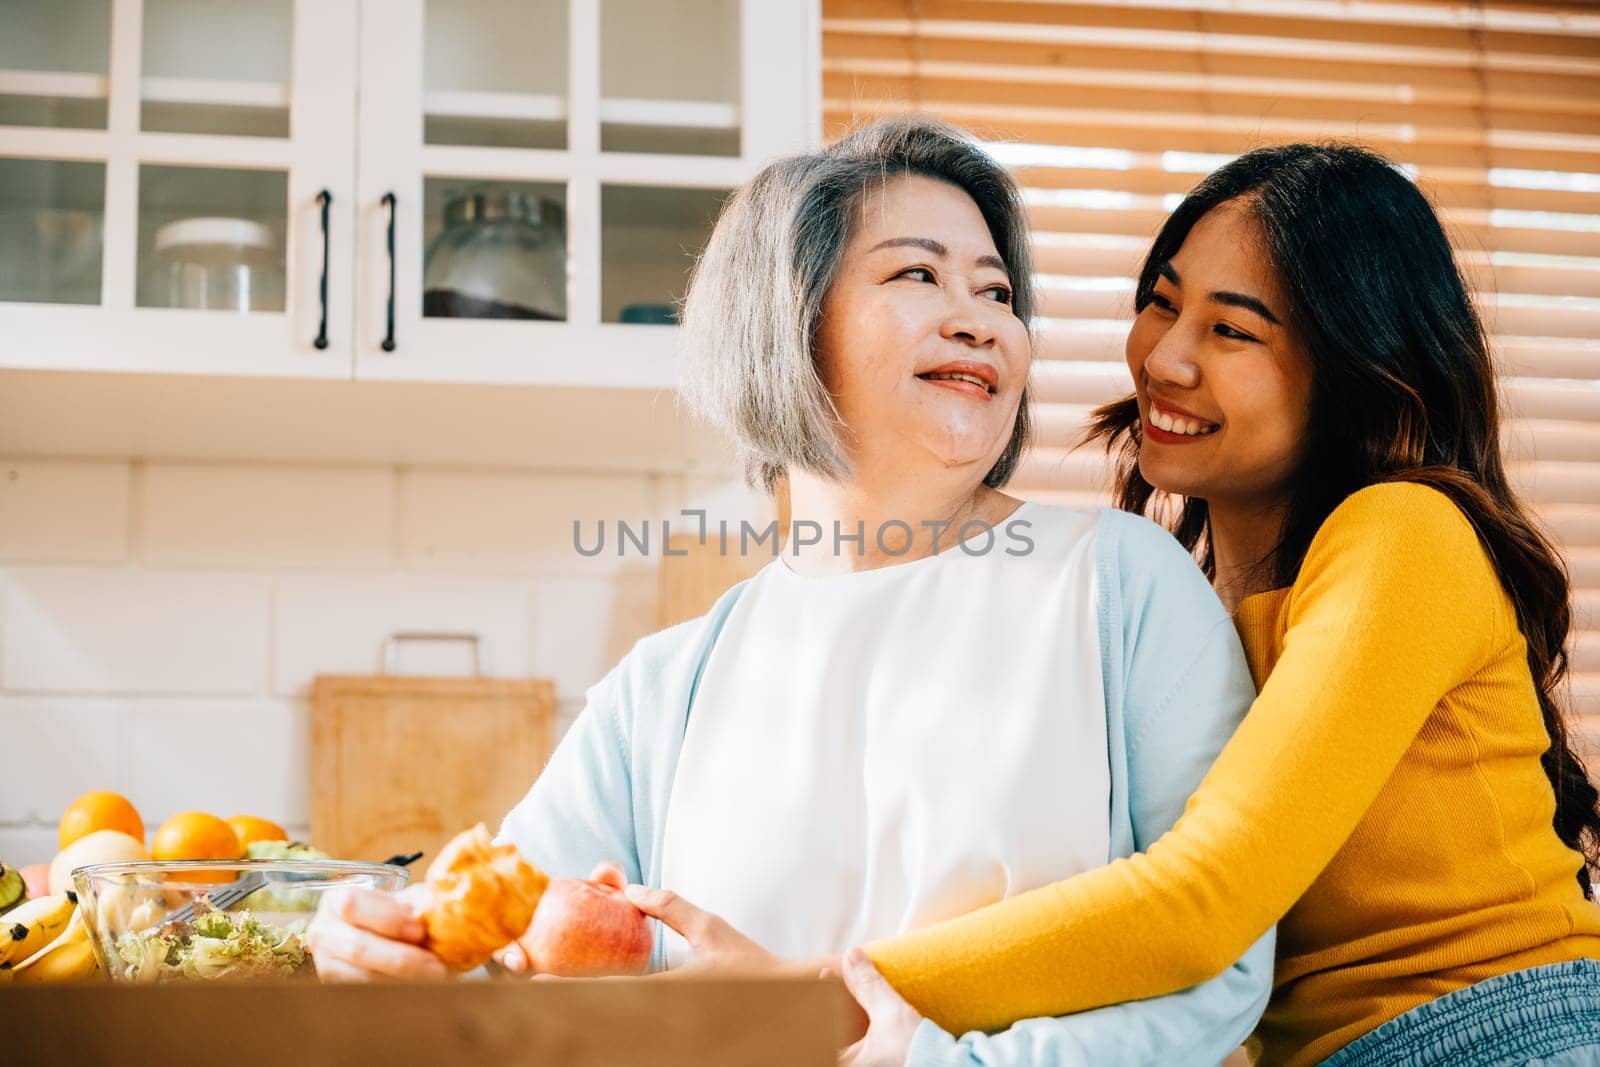 A portrait of an old mother and her adult daughter in the kitchen, holding an apple. Their smiles reflect the happiness and togetherness of family learning and teaching.